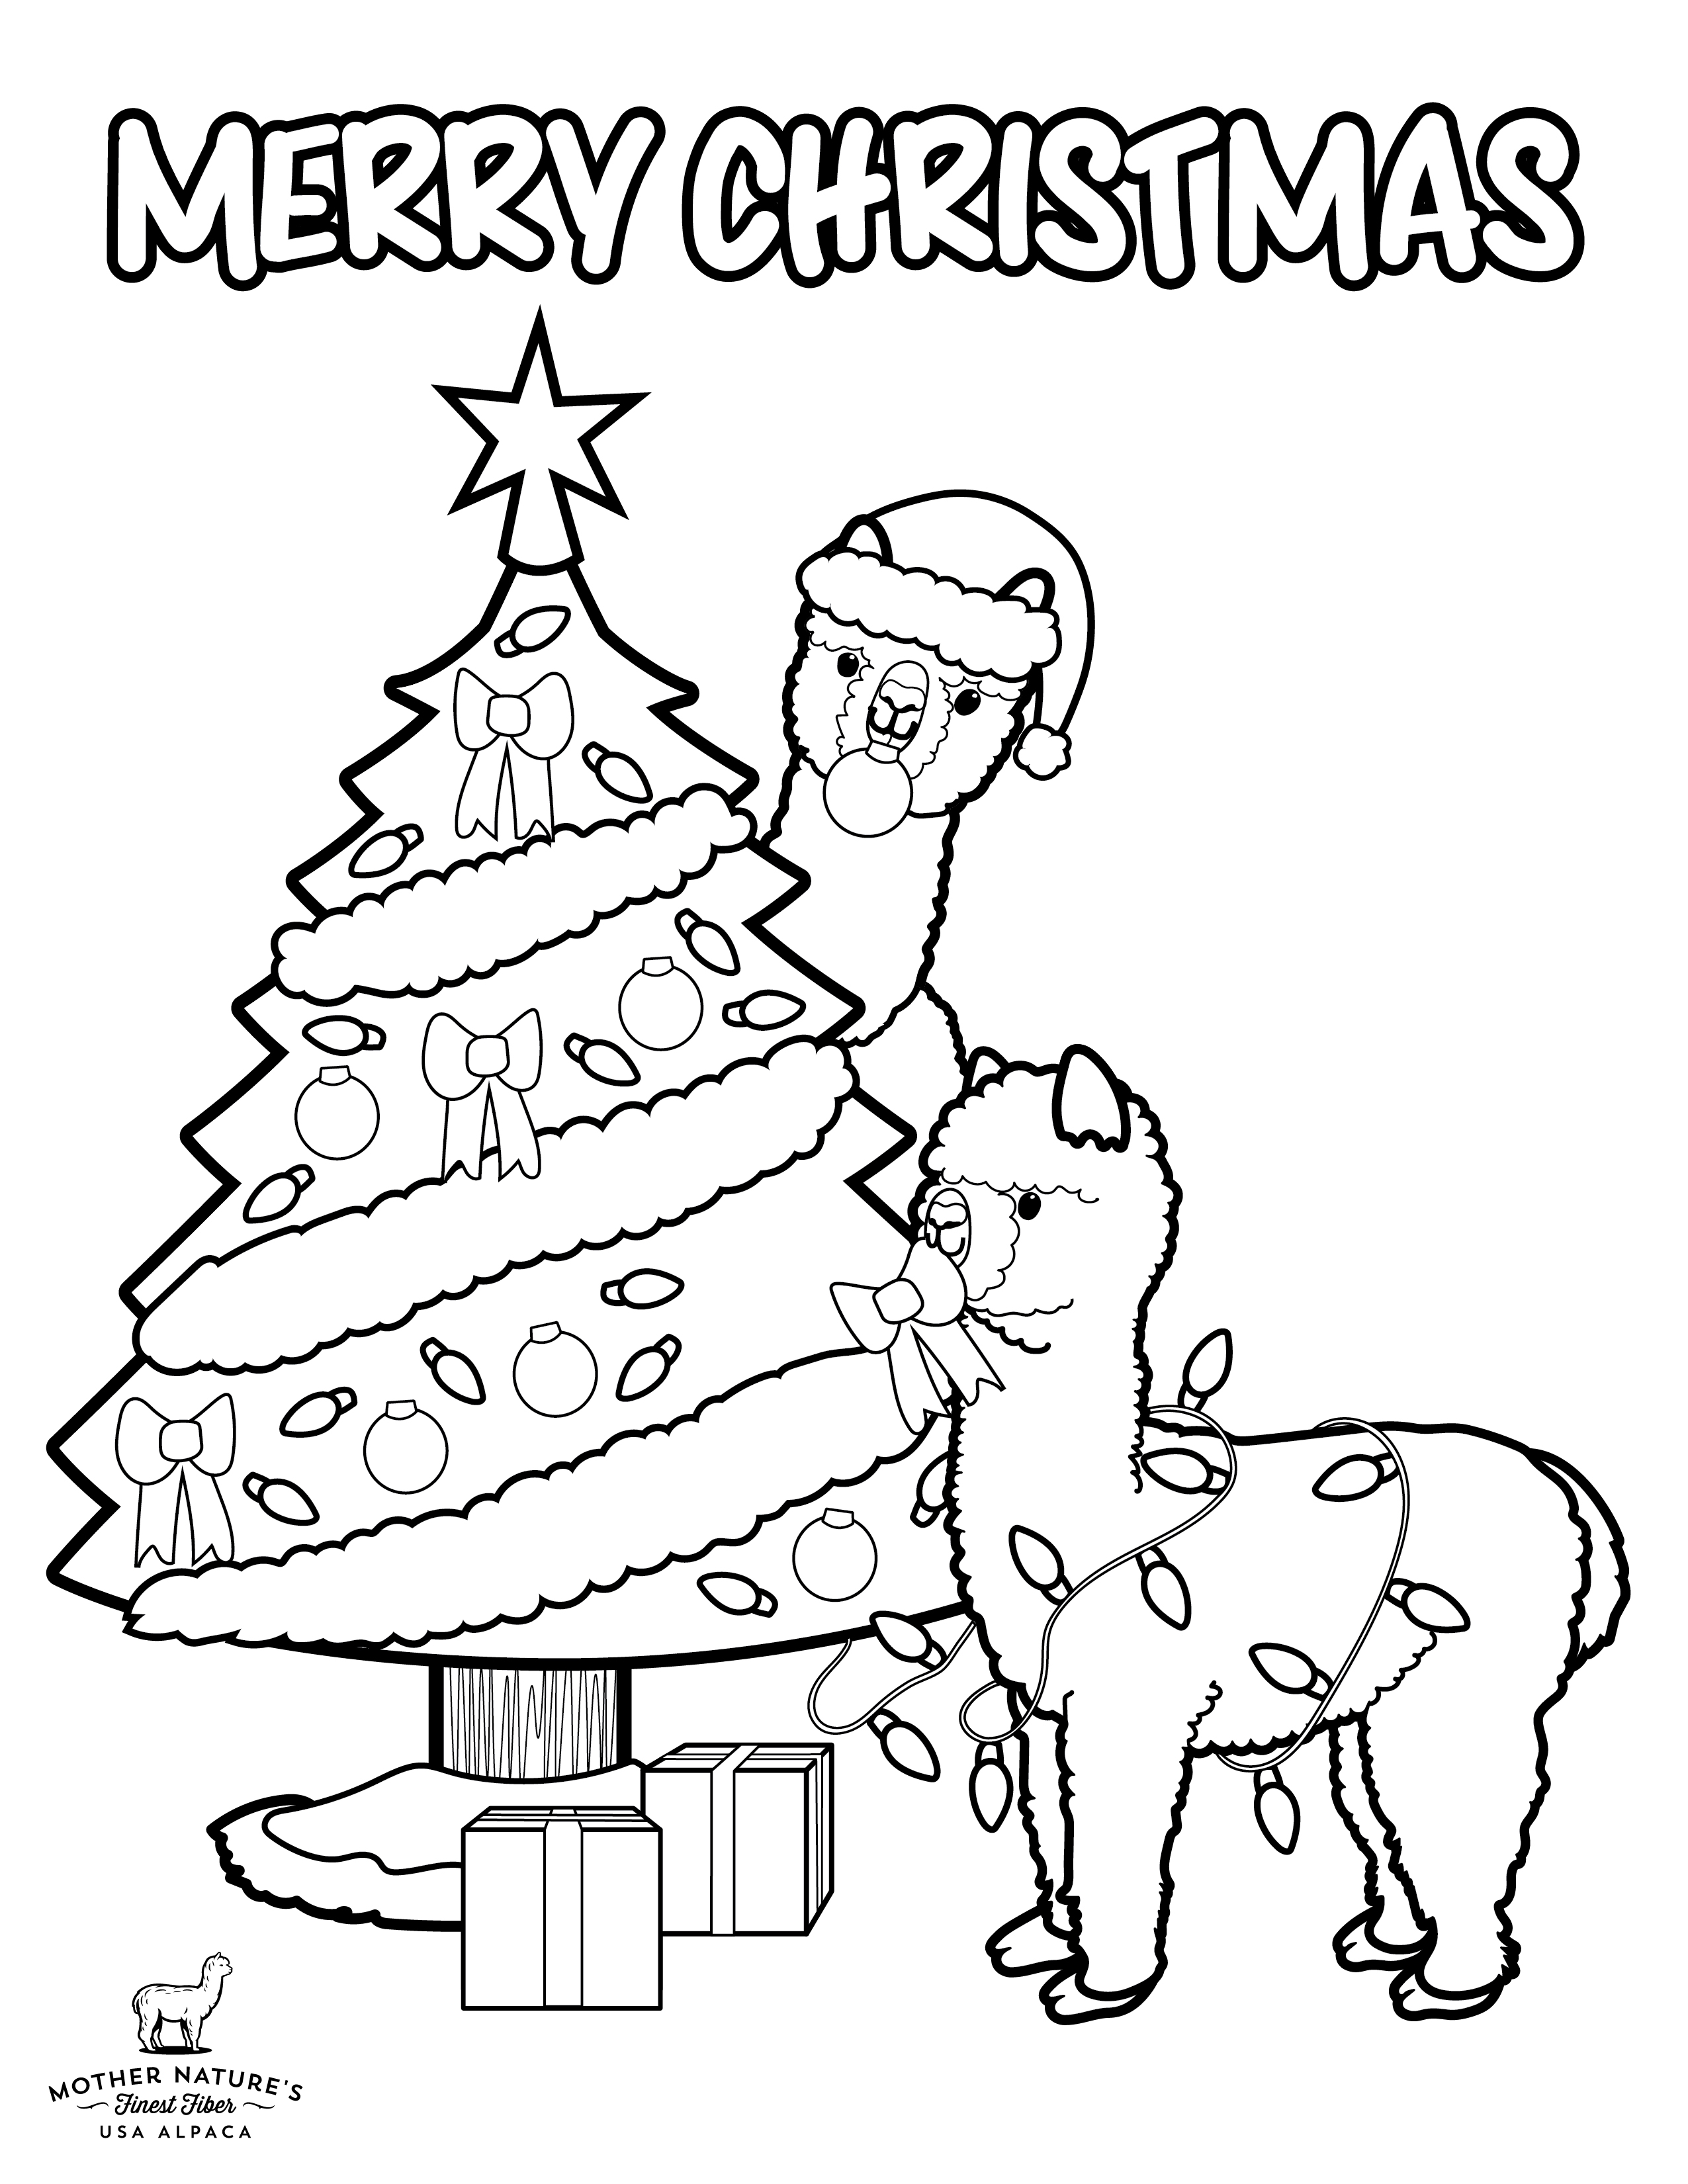 NEW Downloadable Content Christmas Coloring Page